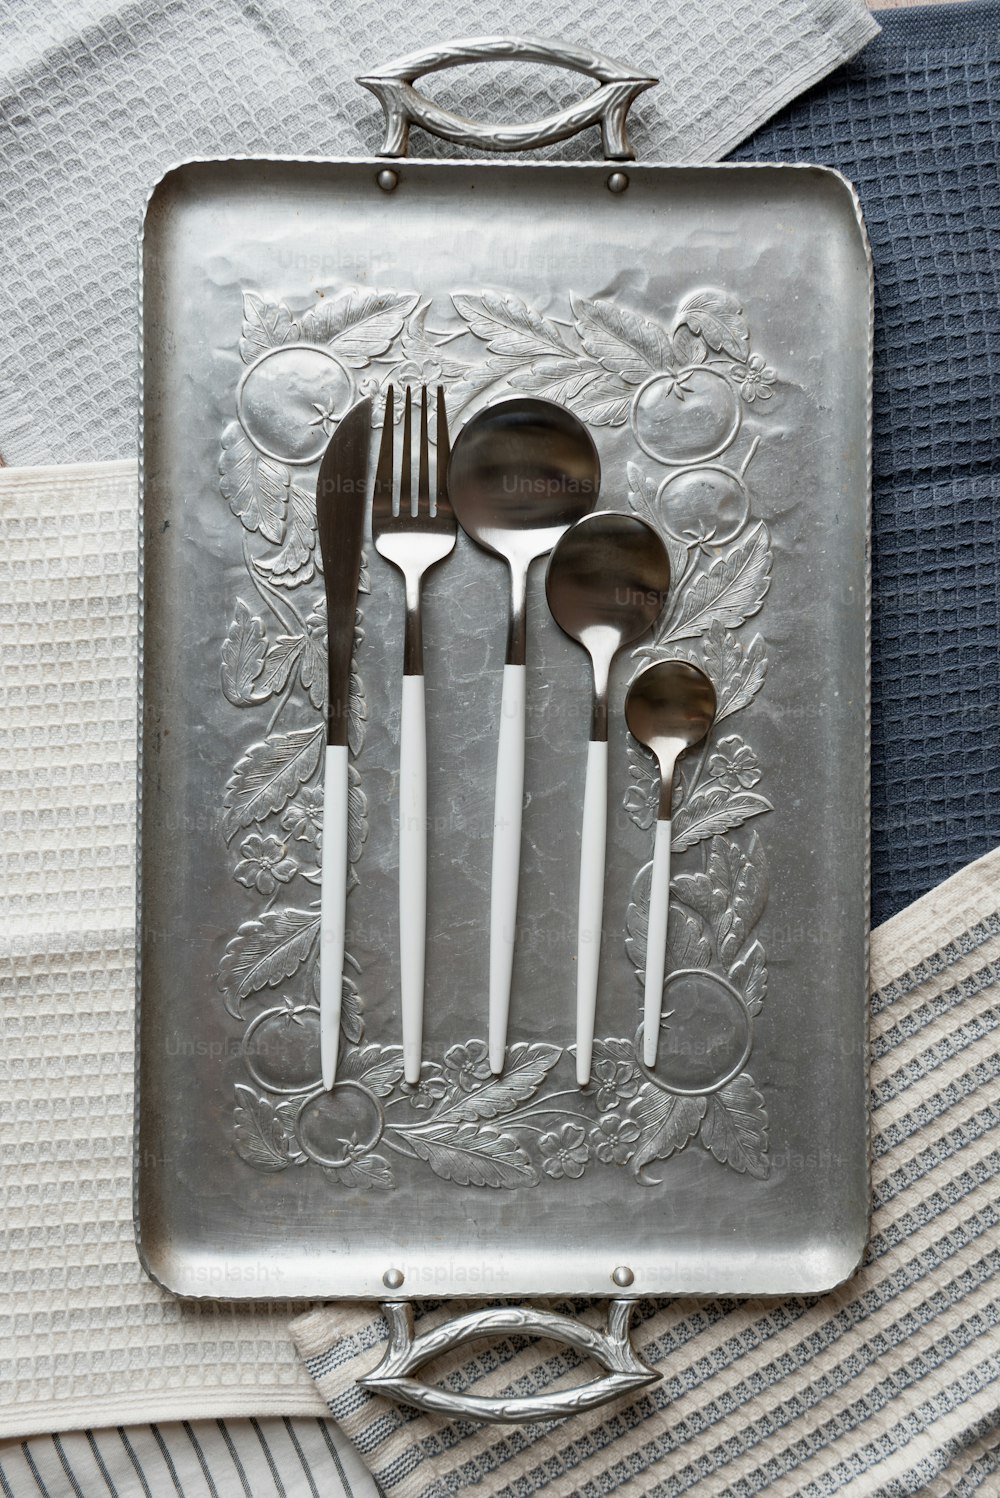 a metal tray with spoons and spoons in it